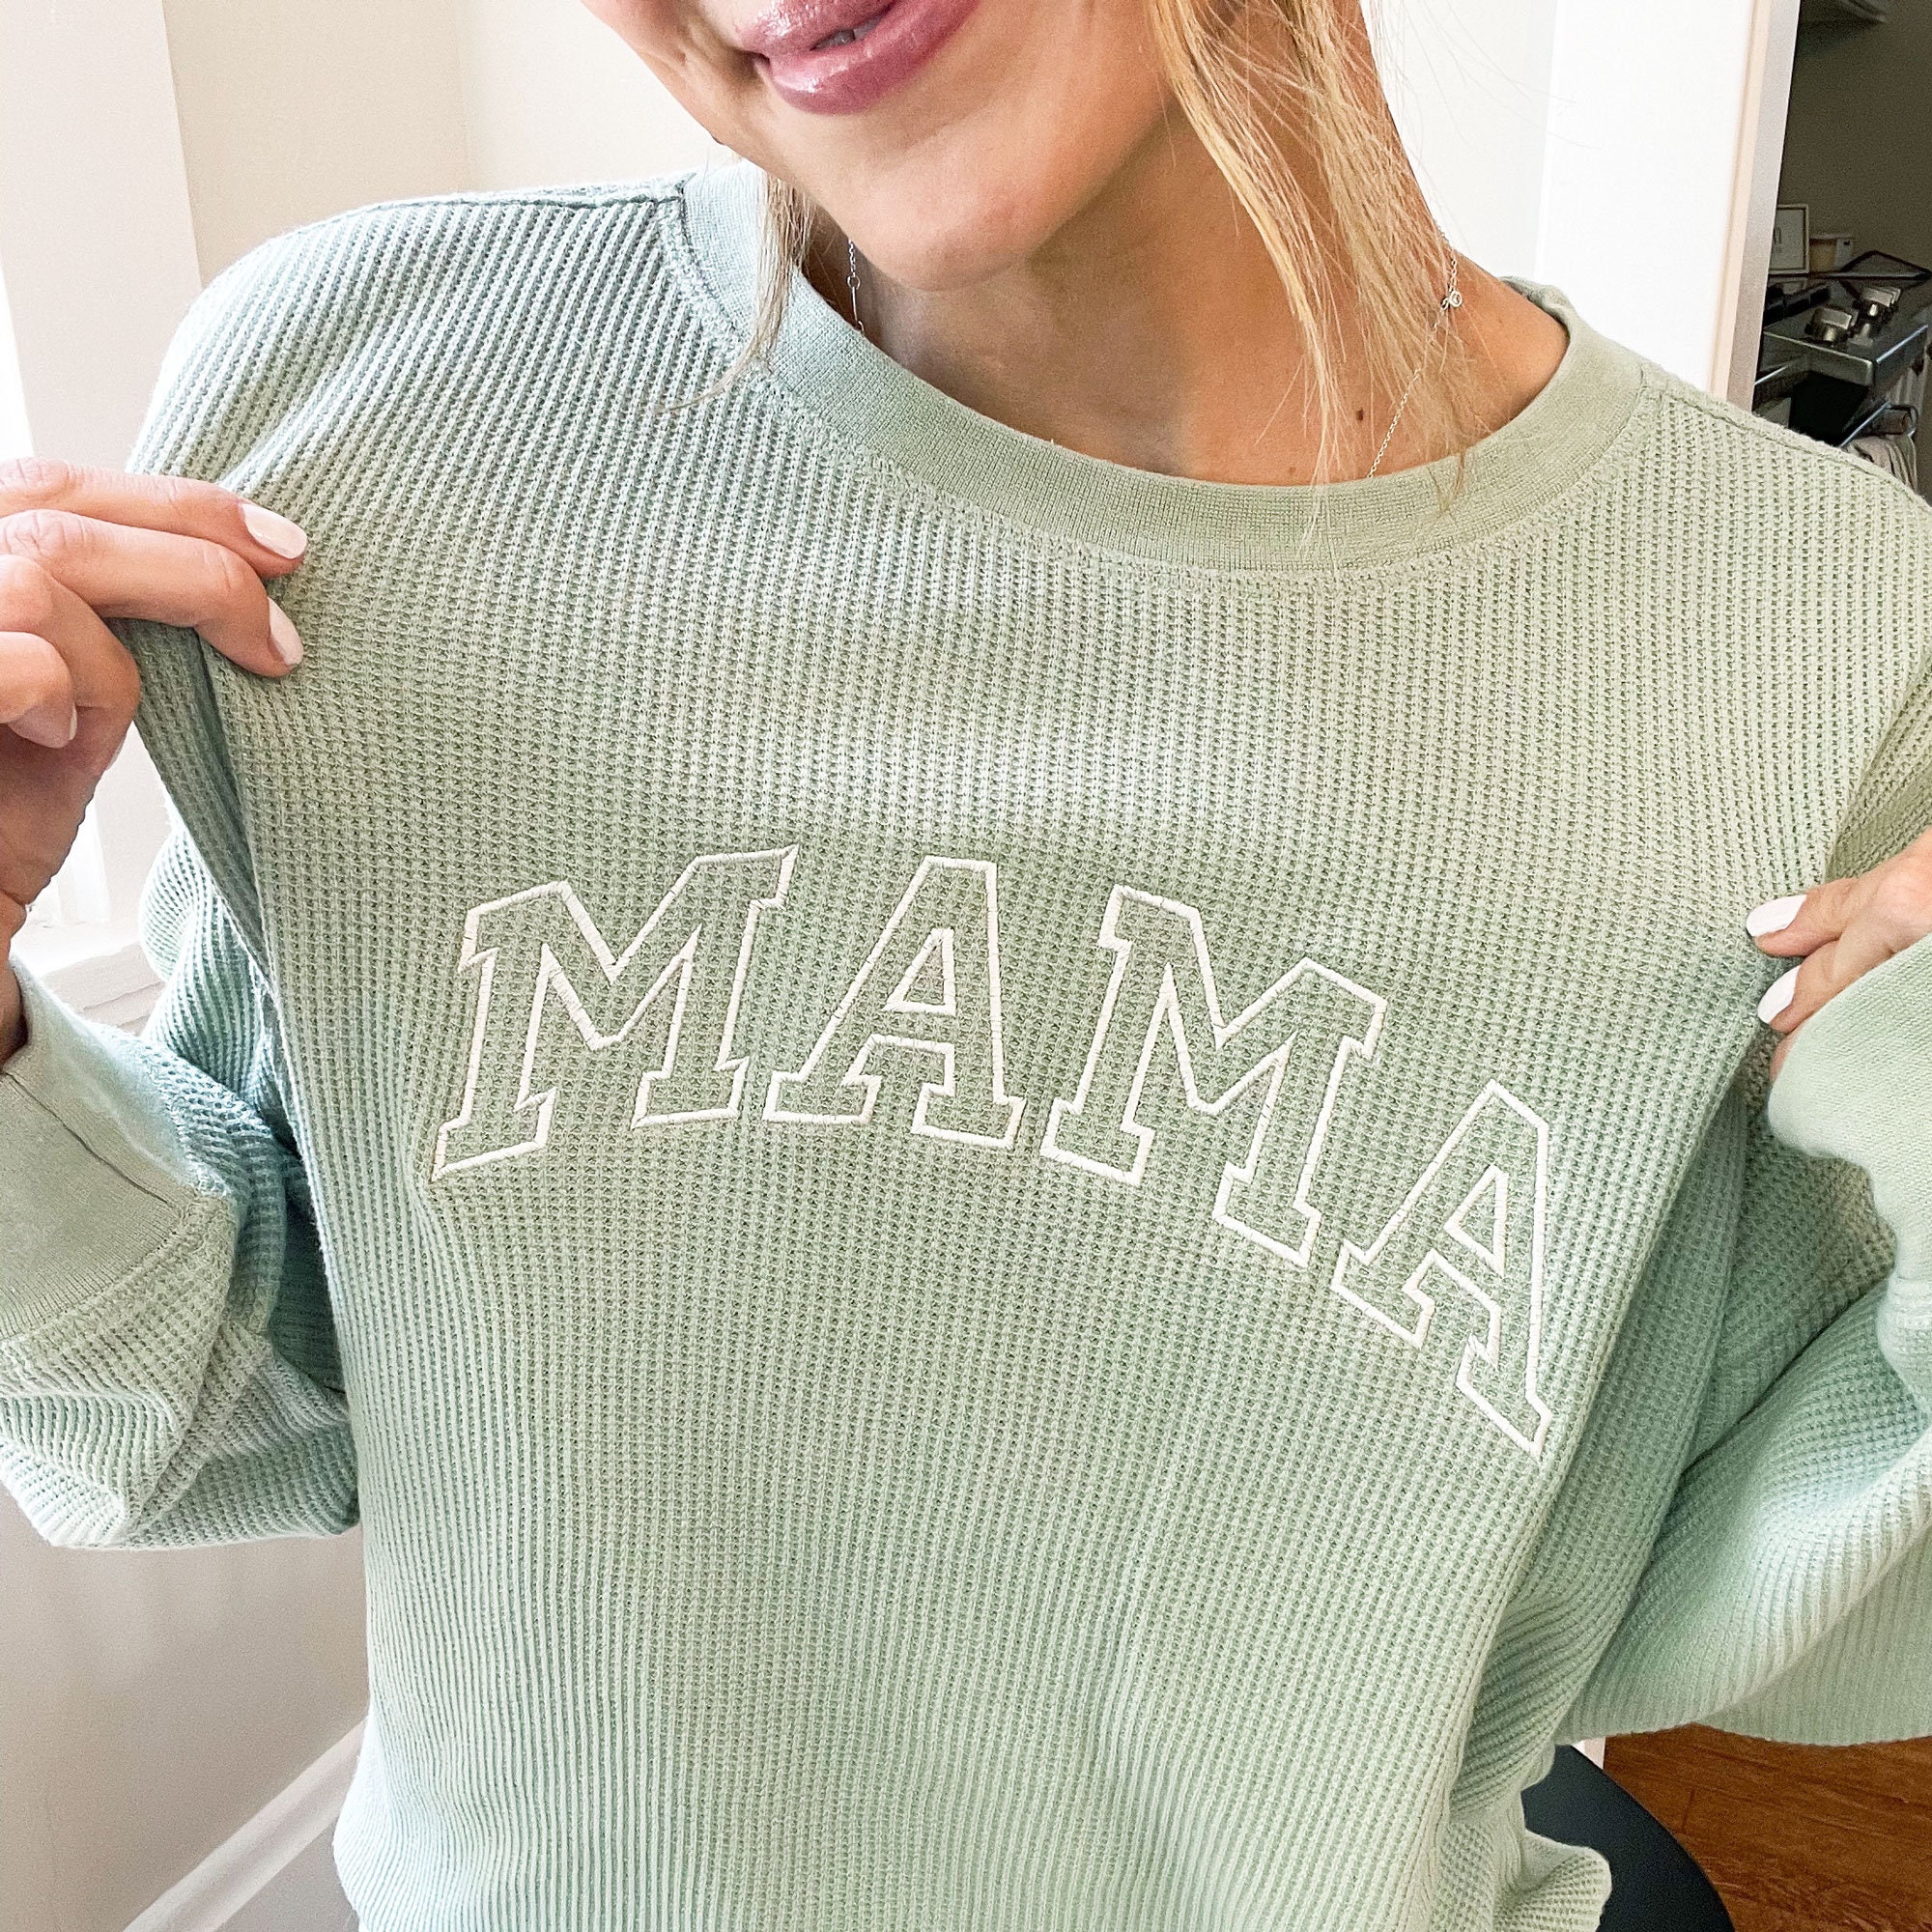 Waffle Knit Mama Crewneck Sweatshirt Embroidered Mama Sweatshirt Family Crewneck  Sweatshirt Pregnancy Announcement Gift for Family 